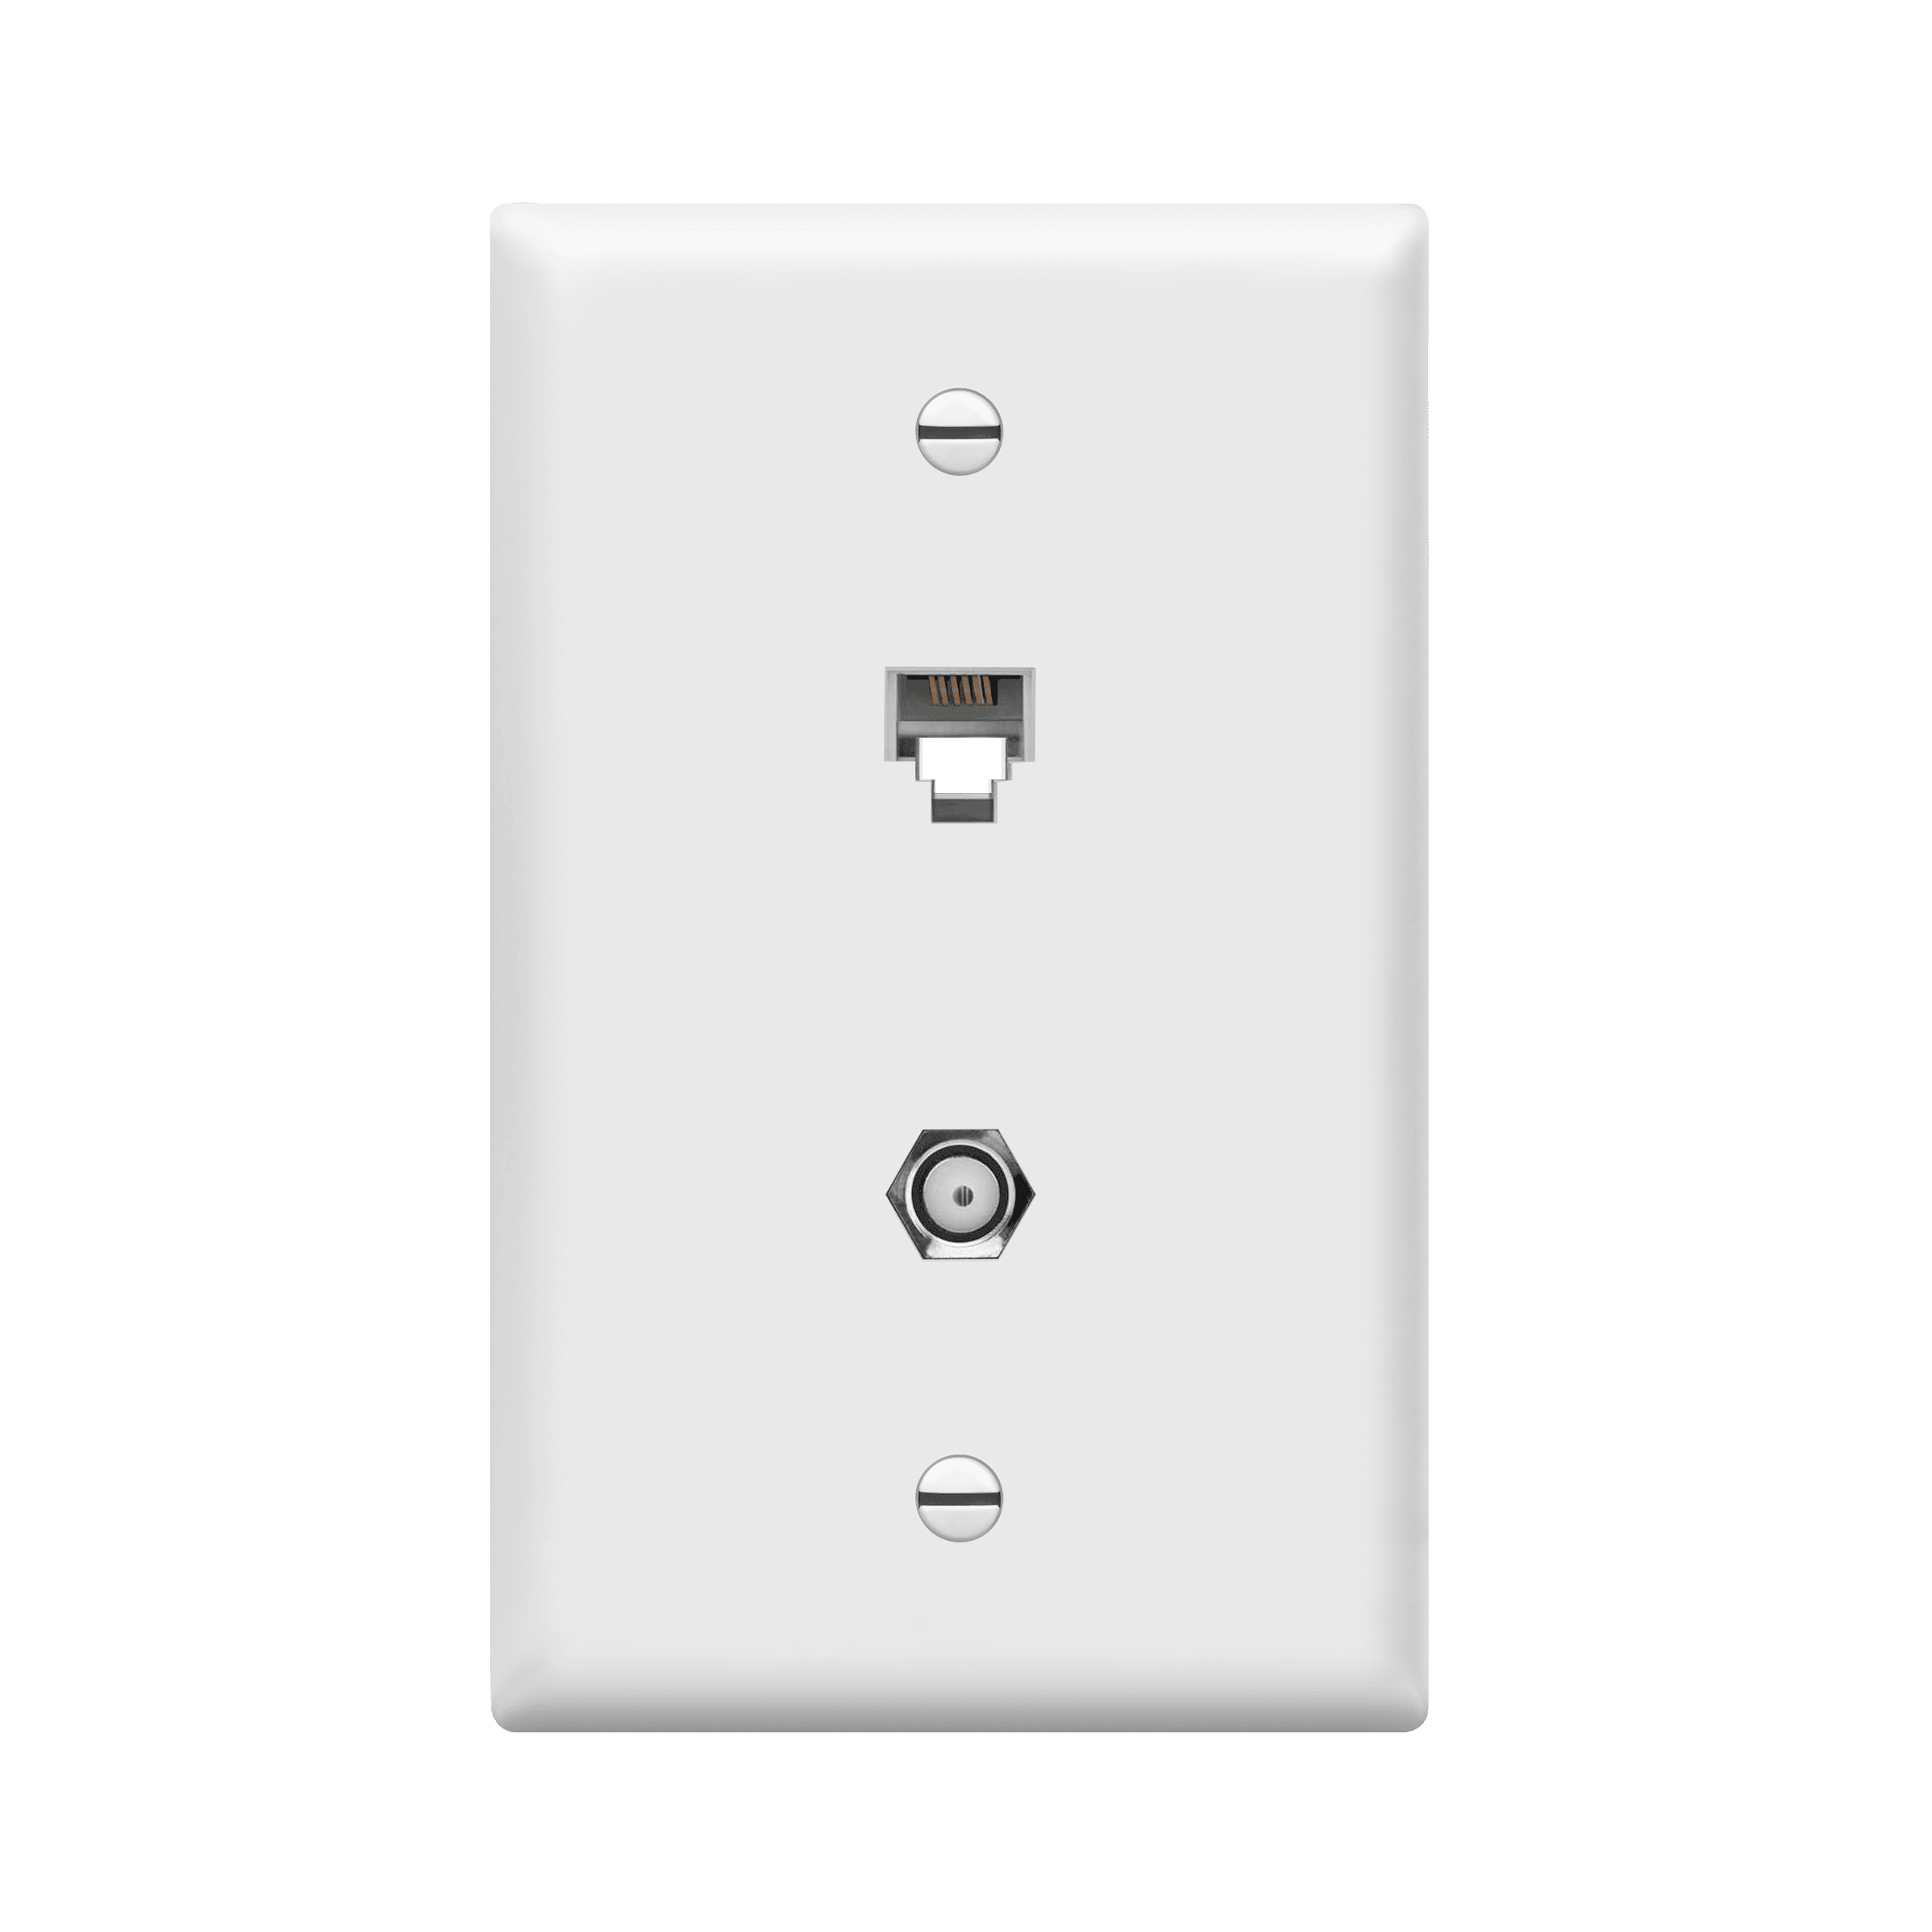 1-Gang RJ11 Telephone Jack 6P6C and F-Type Coaxial Cable Wall Plate